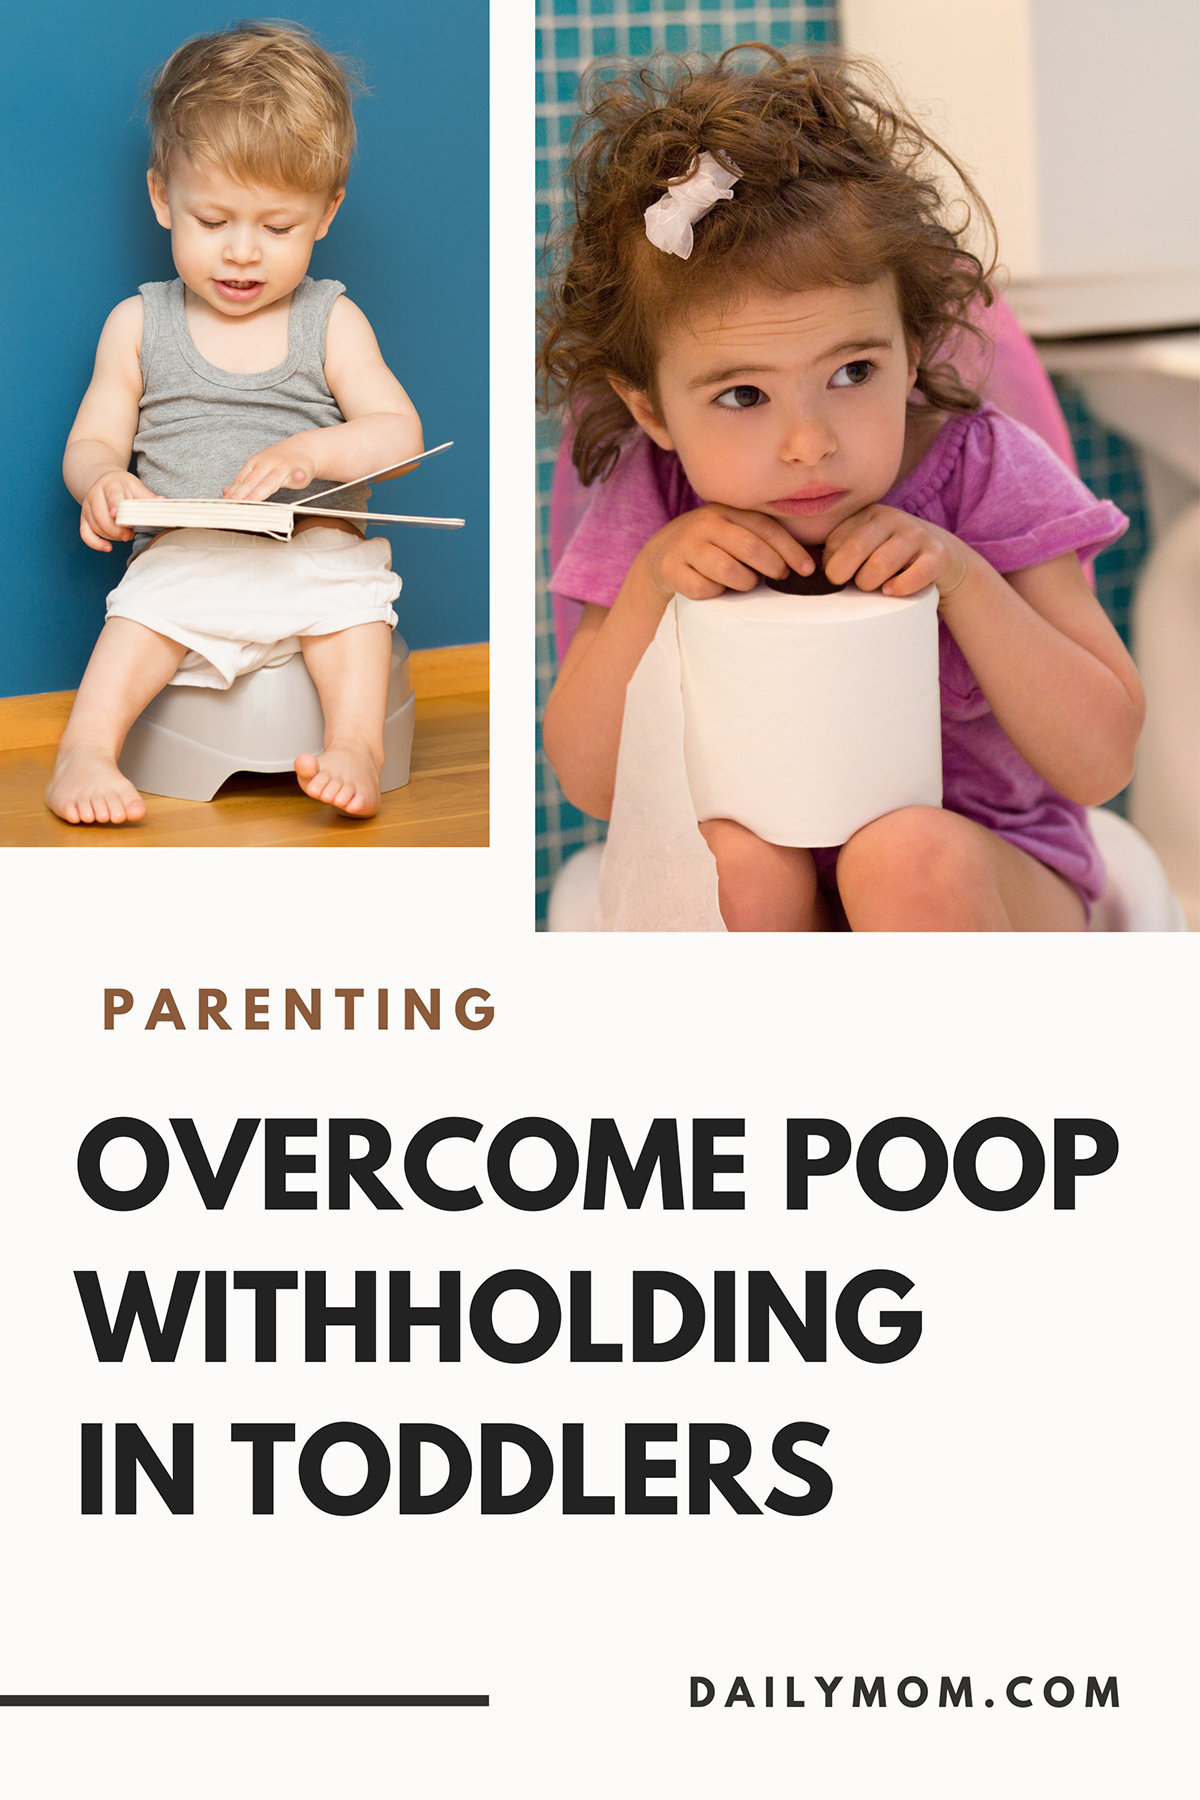 What To Do If Your Toddler Won't Poop? 7 Ways To Overcome Poop Withholding